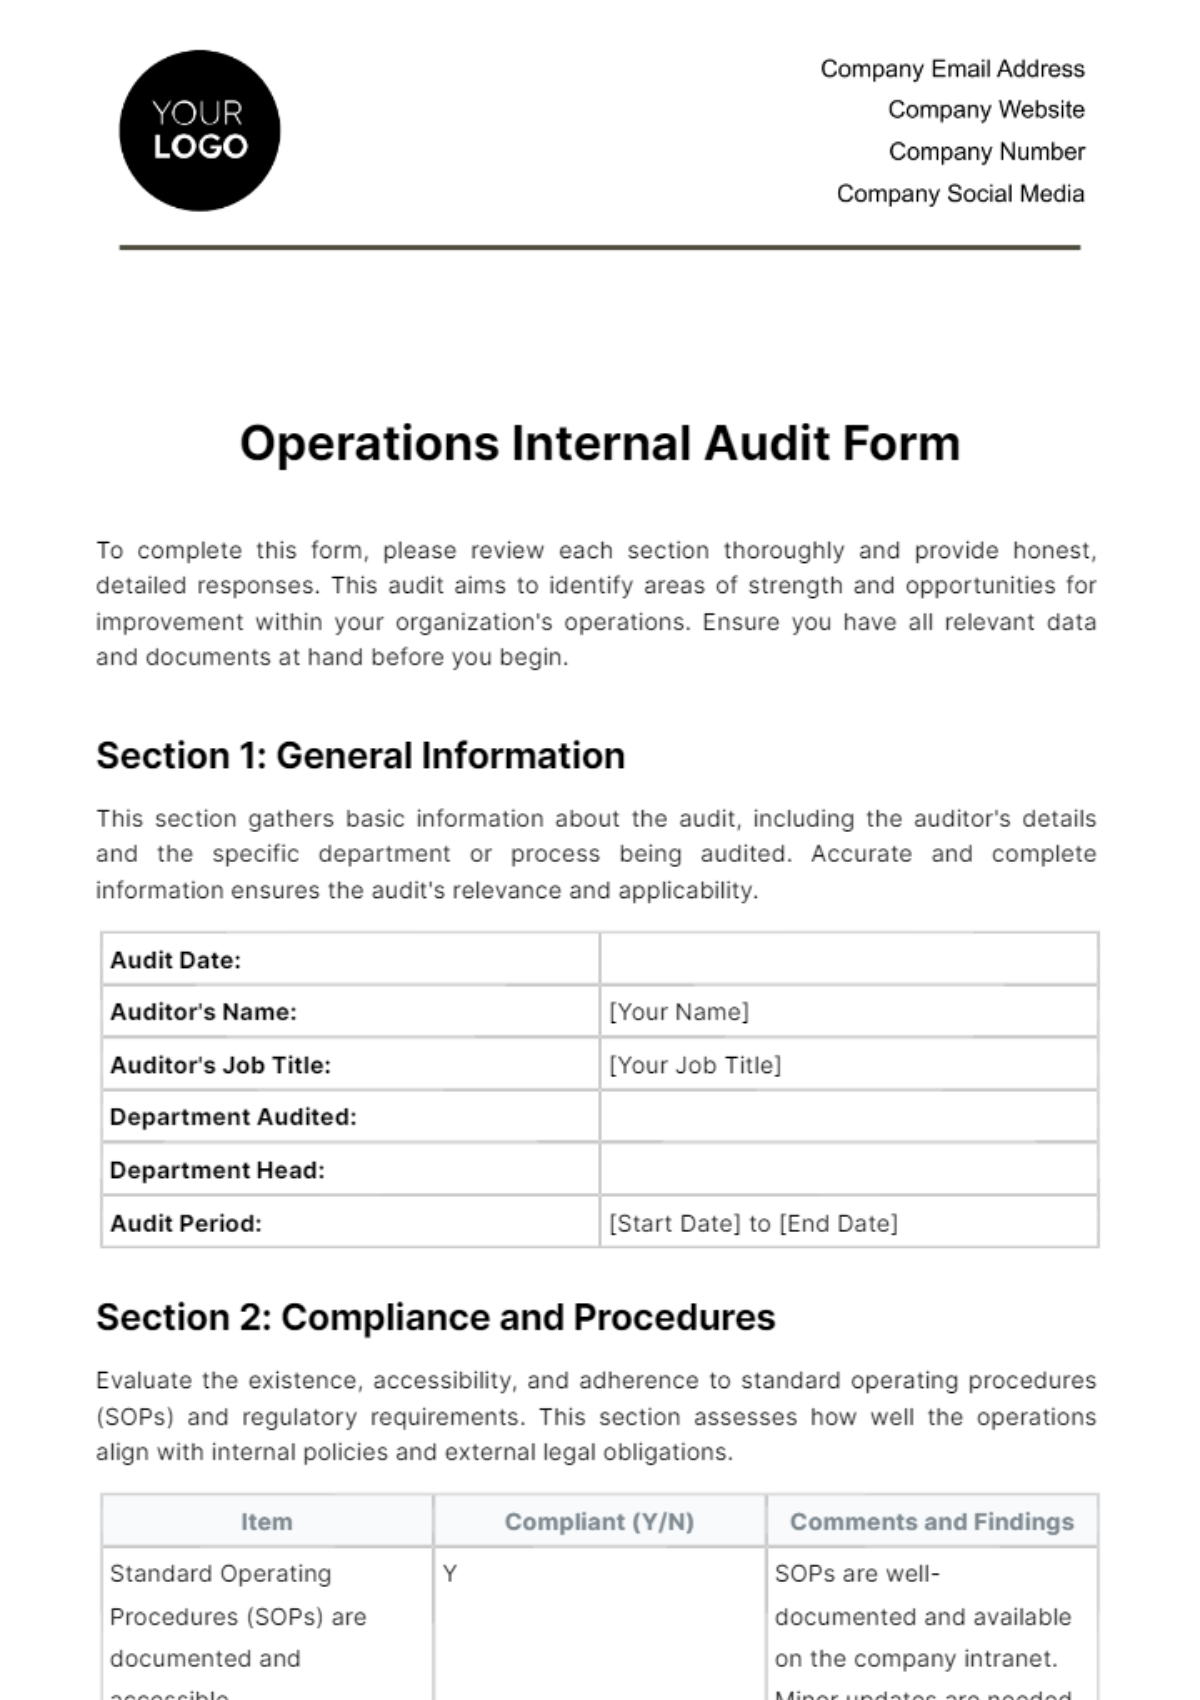 Free Operations Internal Audit Form Template